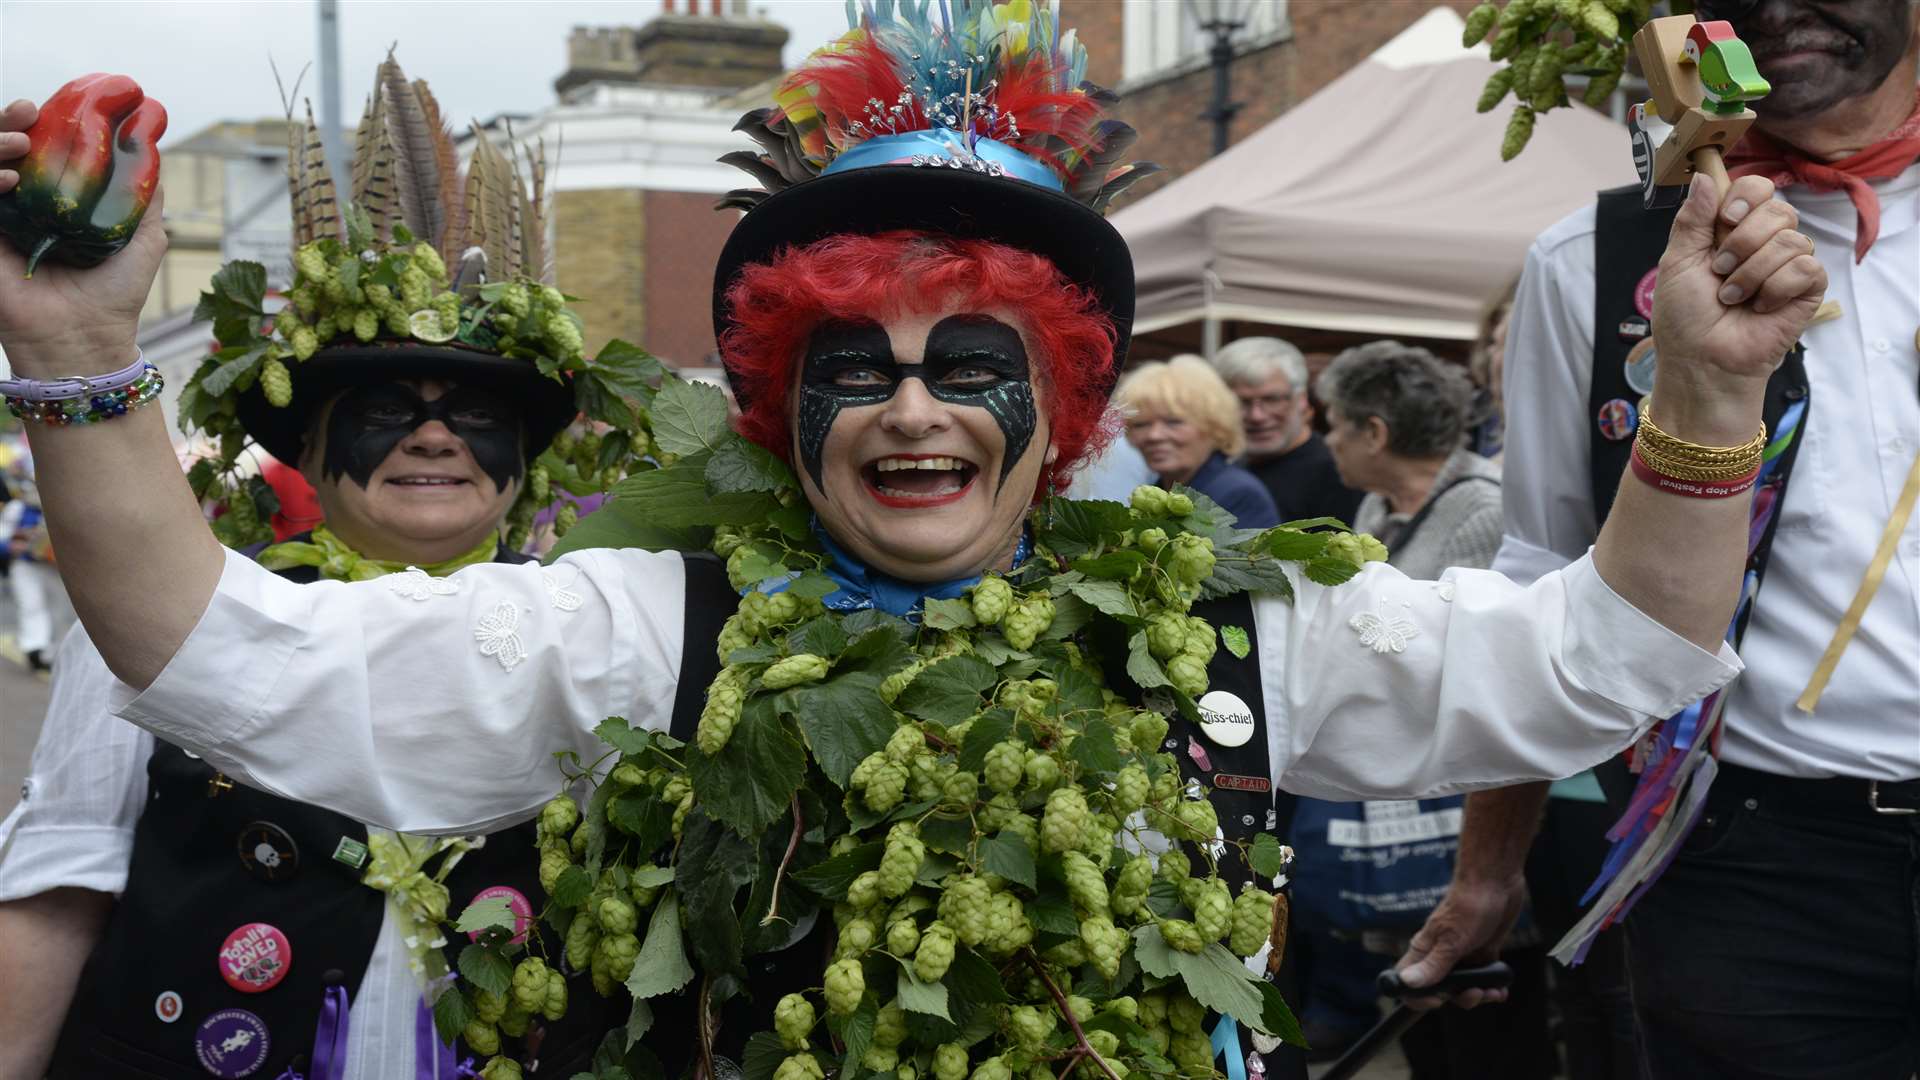 Lesley Hoad of Dead Horse Morris celebrates at last year's festival